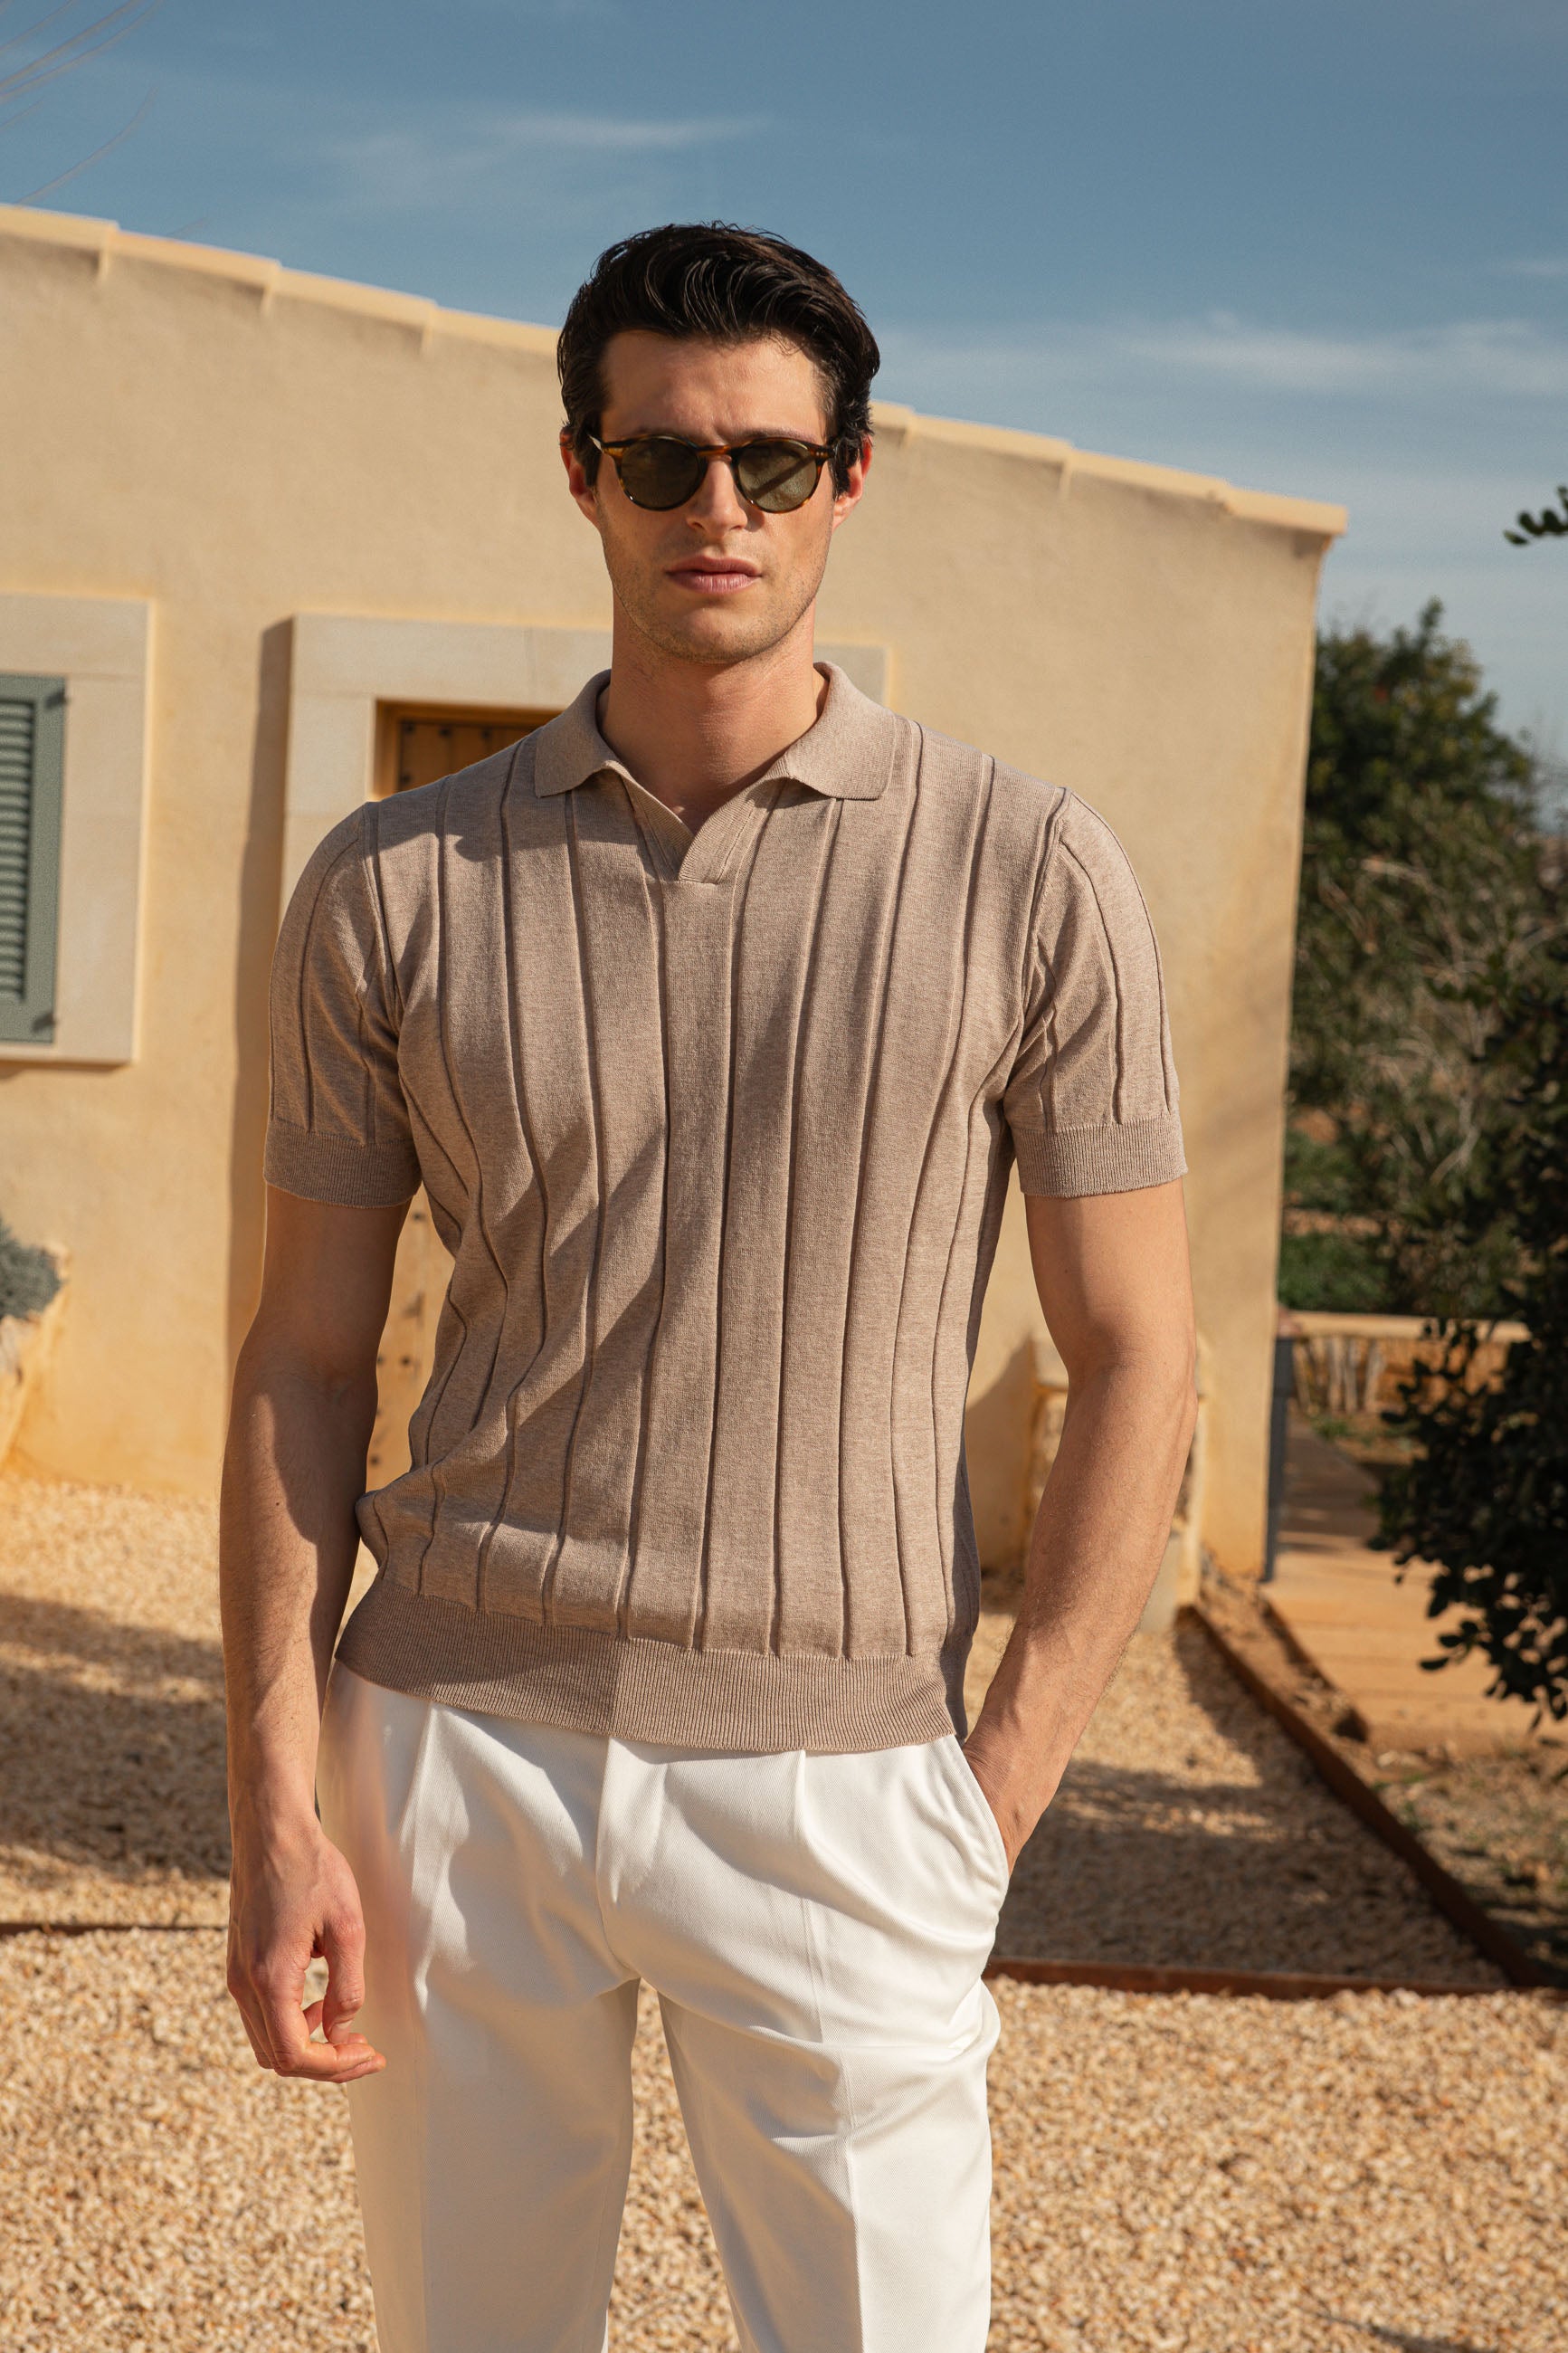 Taupe Ribbed Polo, Knit Polo Taupe, cotton knitted polo, cotton ribbed Taupe polo, Taupe Ribbed Knit Polo, Polo Taupe a coste, Polo Taupe a maglia, Polo in cotone a maglia, Polo Taupe in cotone a coste, Polo Taupe a maglia, Polo Taupe côtelé, Polo Taupe tricoté, Polo coton tricoté, Polo Taupe coton côtelé, Polo Taupe tricoté,